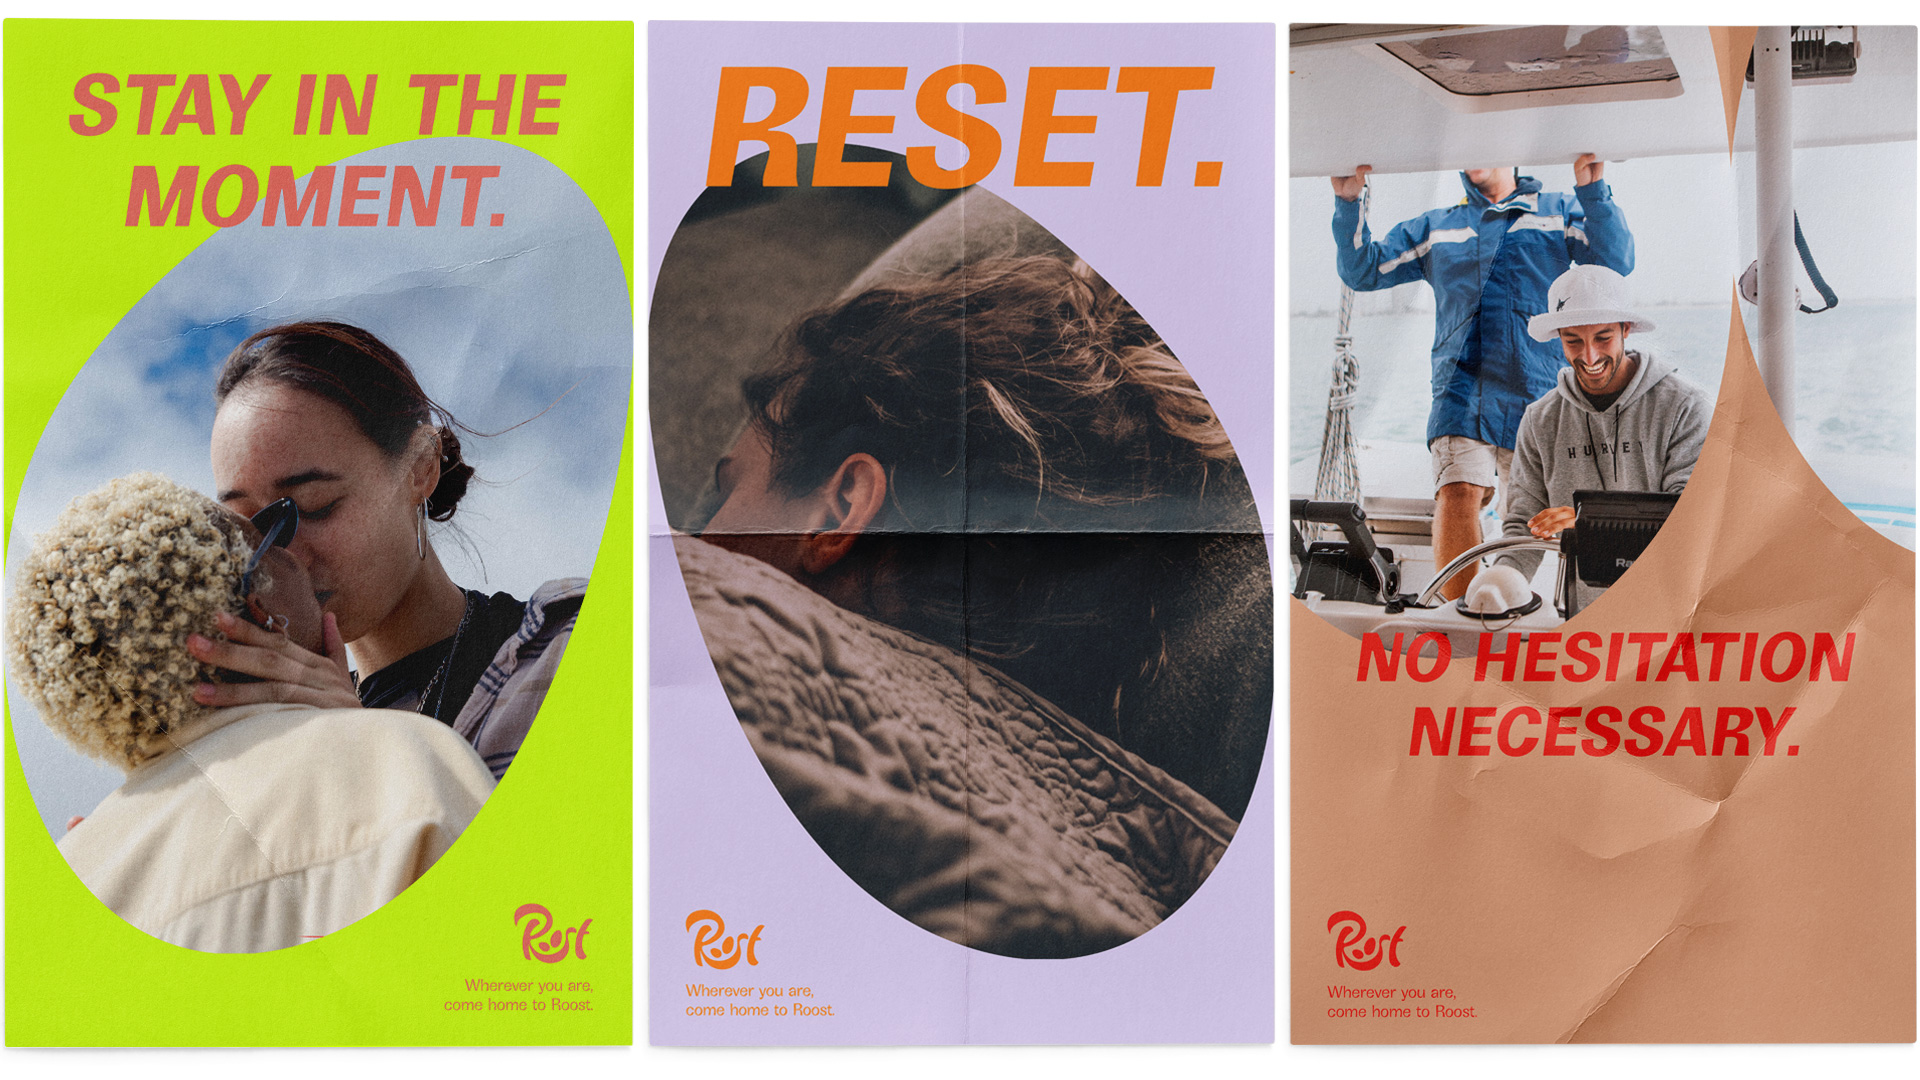 Branding and poster advertisement design for global hotel chain, Roost, by Mikaela Johnson Capilano University IDEA graduate 2022